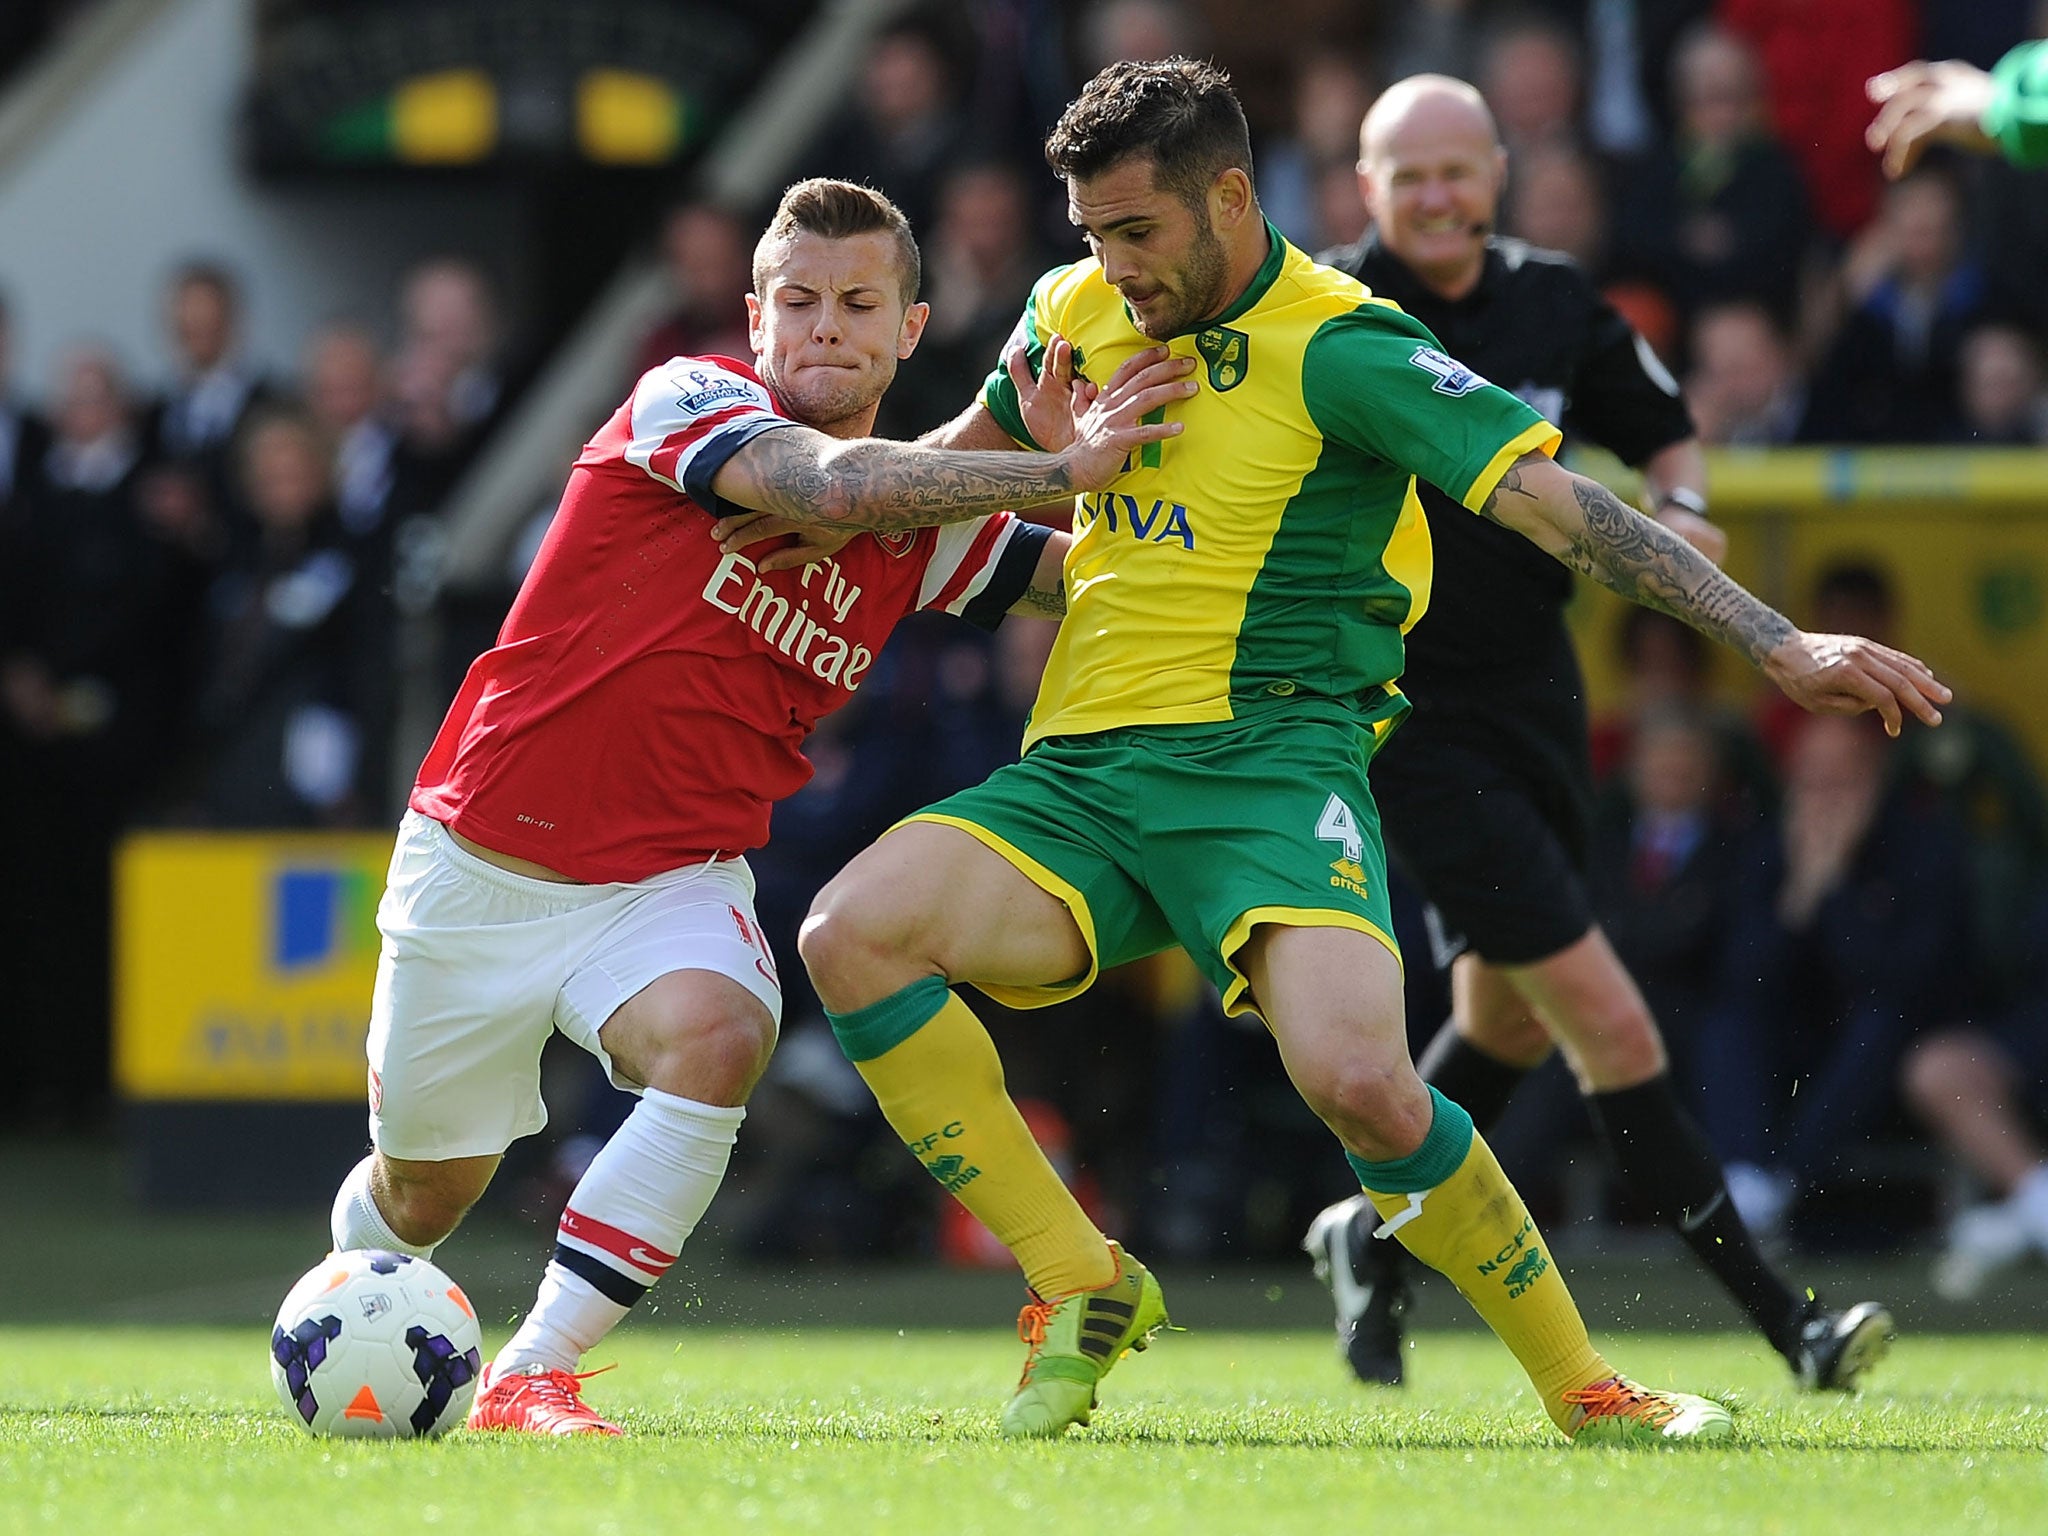 Jack Wilshere returned for Arsenal for their final league game of the season last Sunday